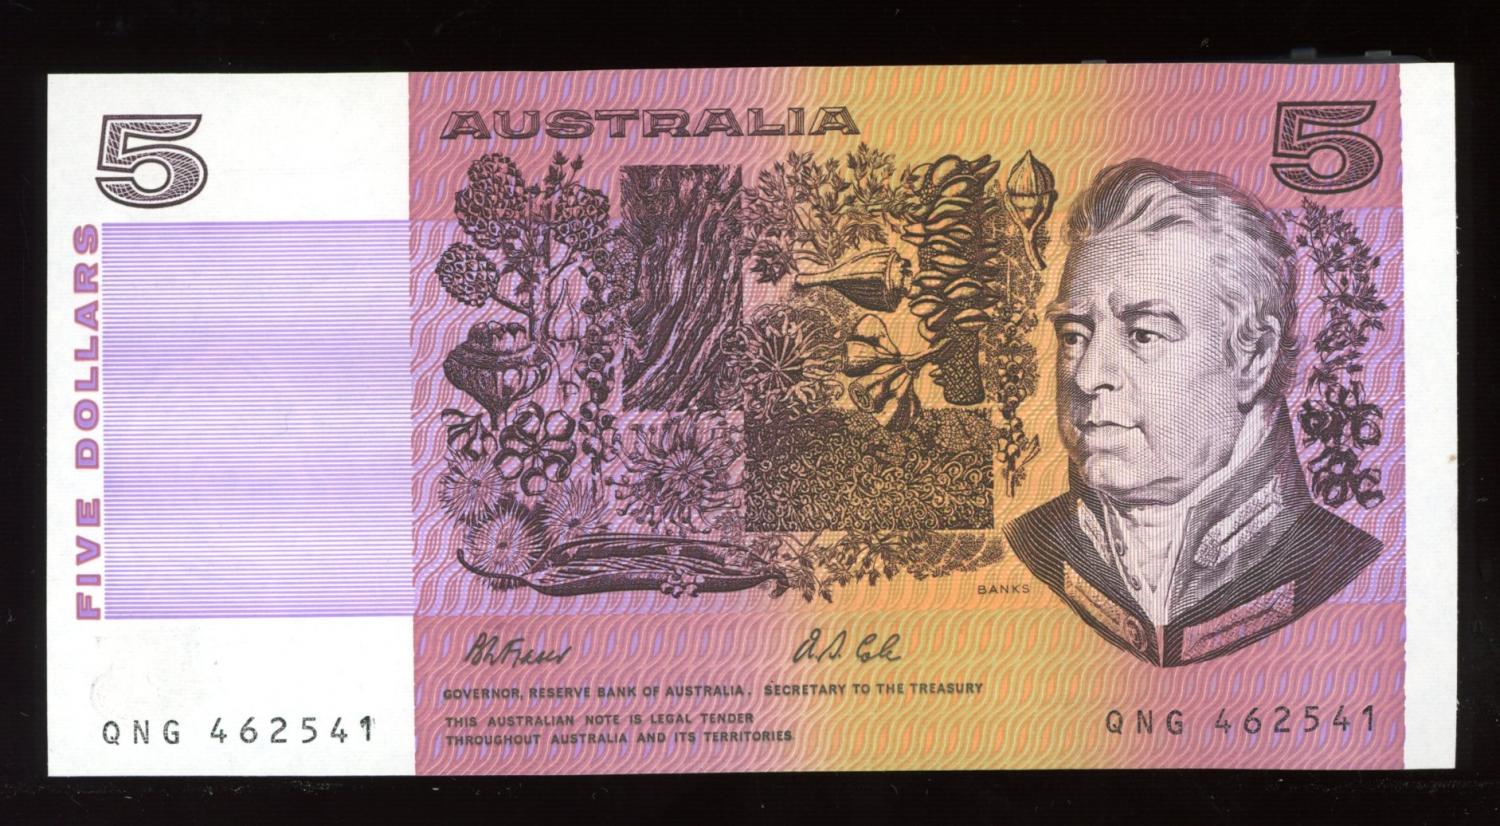 Thumbnail for 1991 $5.00 Fraser-Cole QNG 462541 UNC